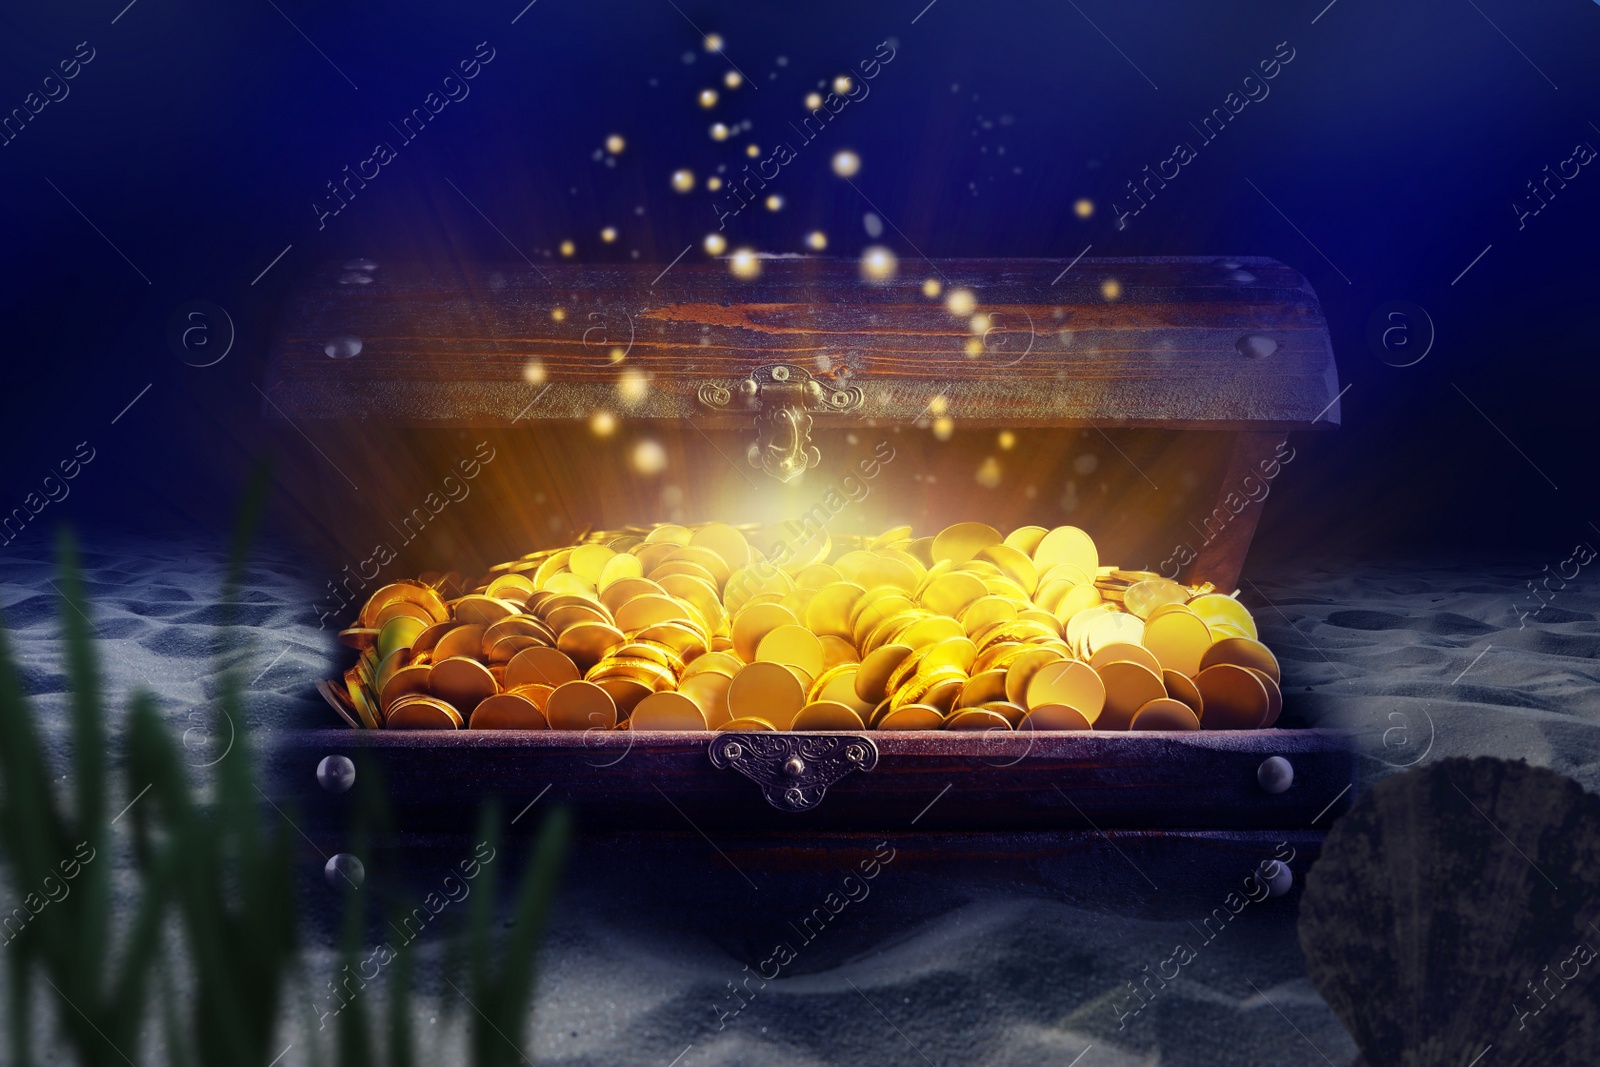 Image of Open treasure chest with gold coins on sand seabed